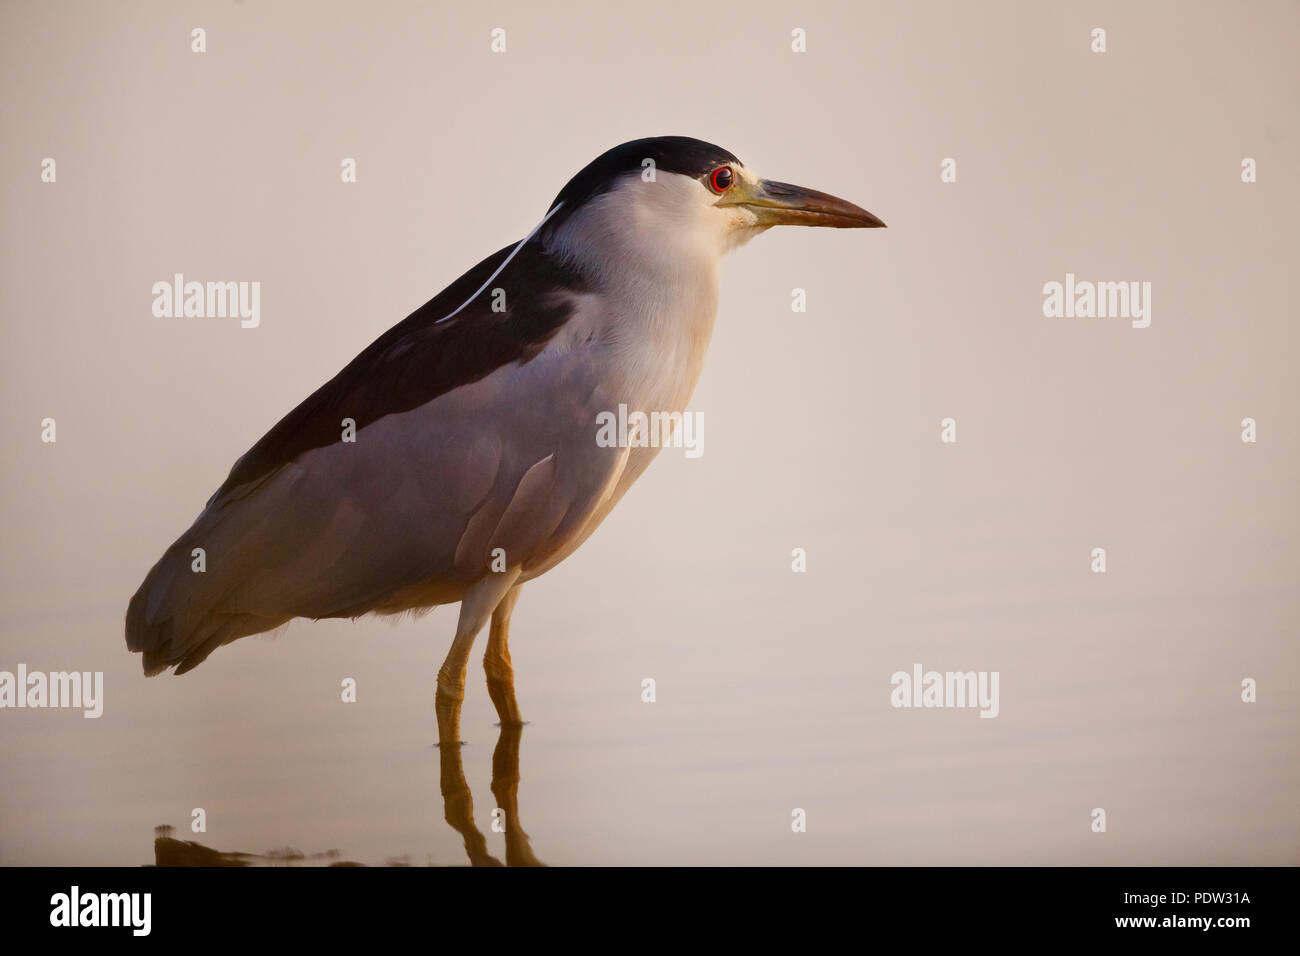 Black-crowned Night-heron, Nycticorax nycticorax, in a pond in Sarigua National Park, Herrera province, Republic of Panama. Stock Photo